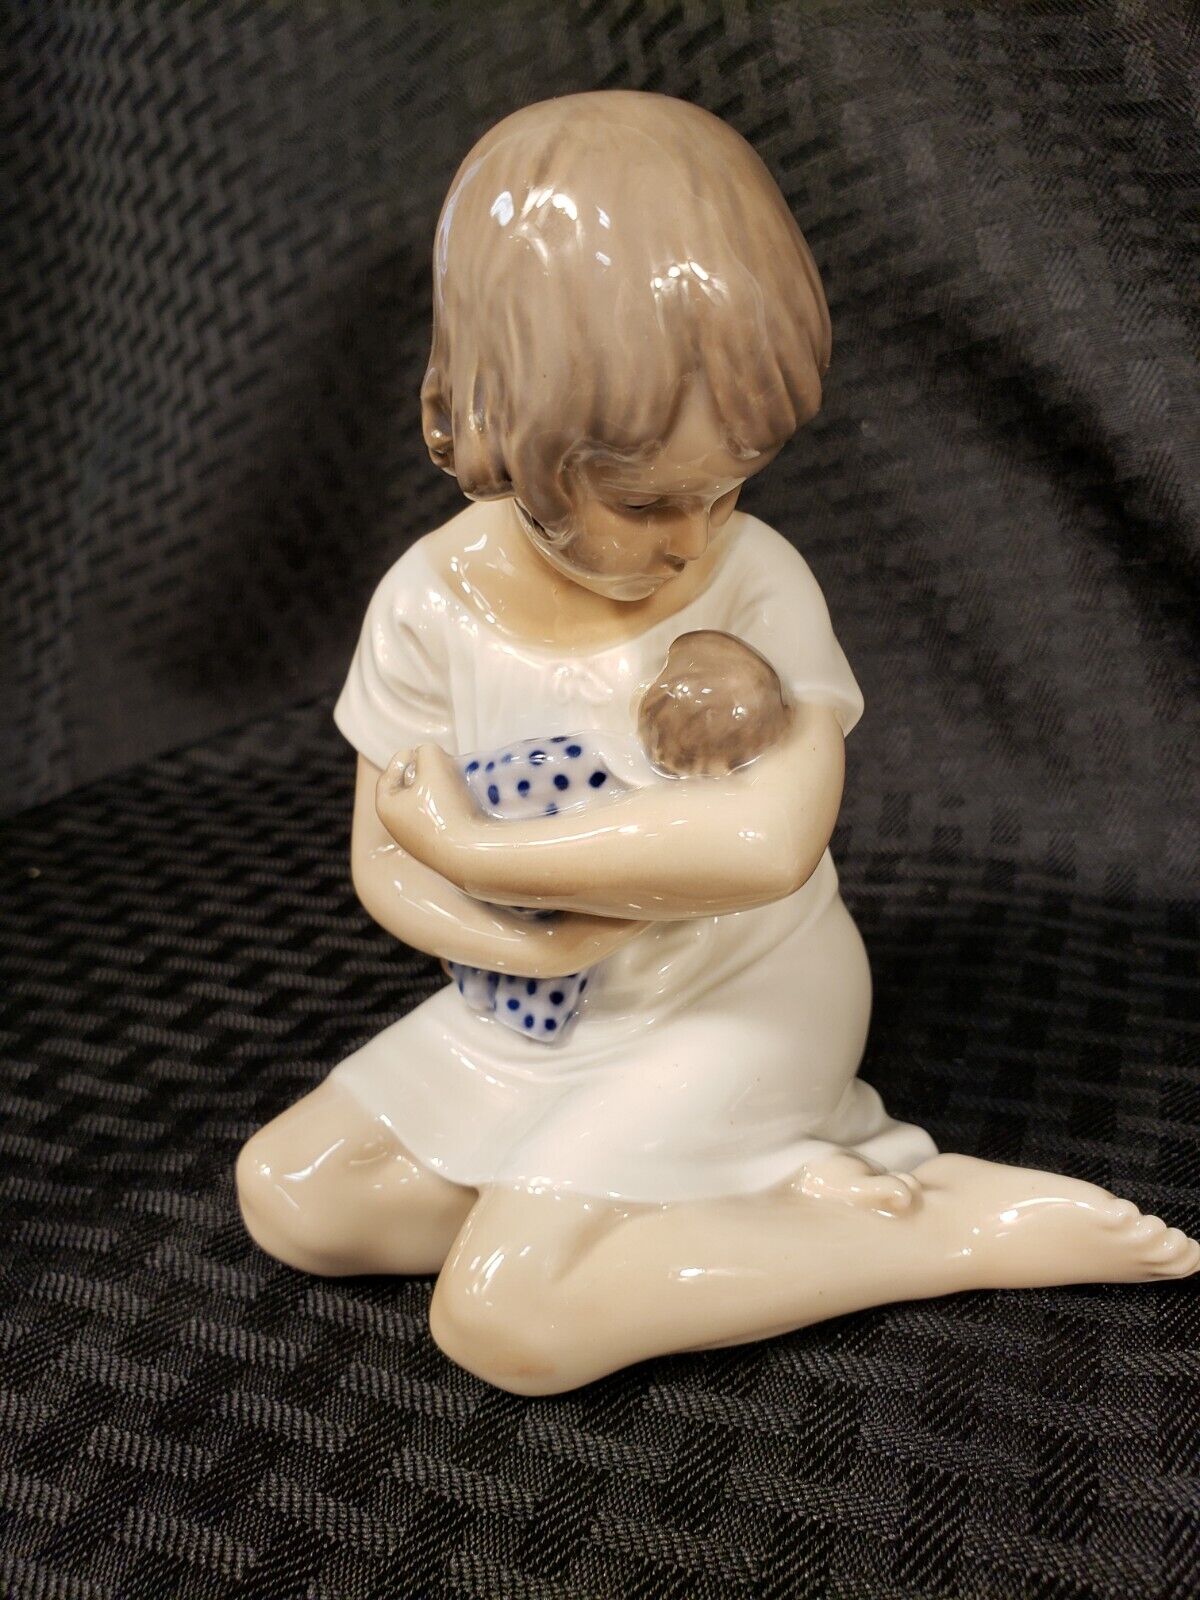 VINTAGE ROYAL COPENHAGEN GIRL WITH BABY DOLL - EXCELLENT PREOWNED CONDITION